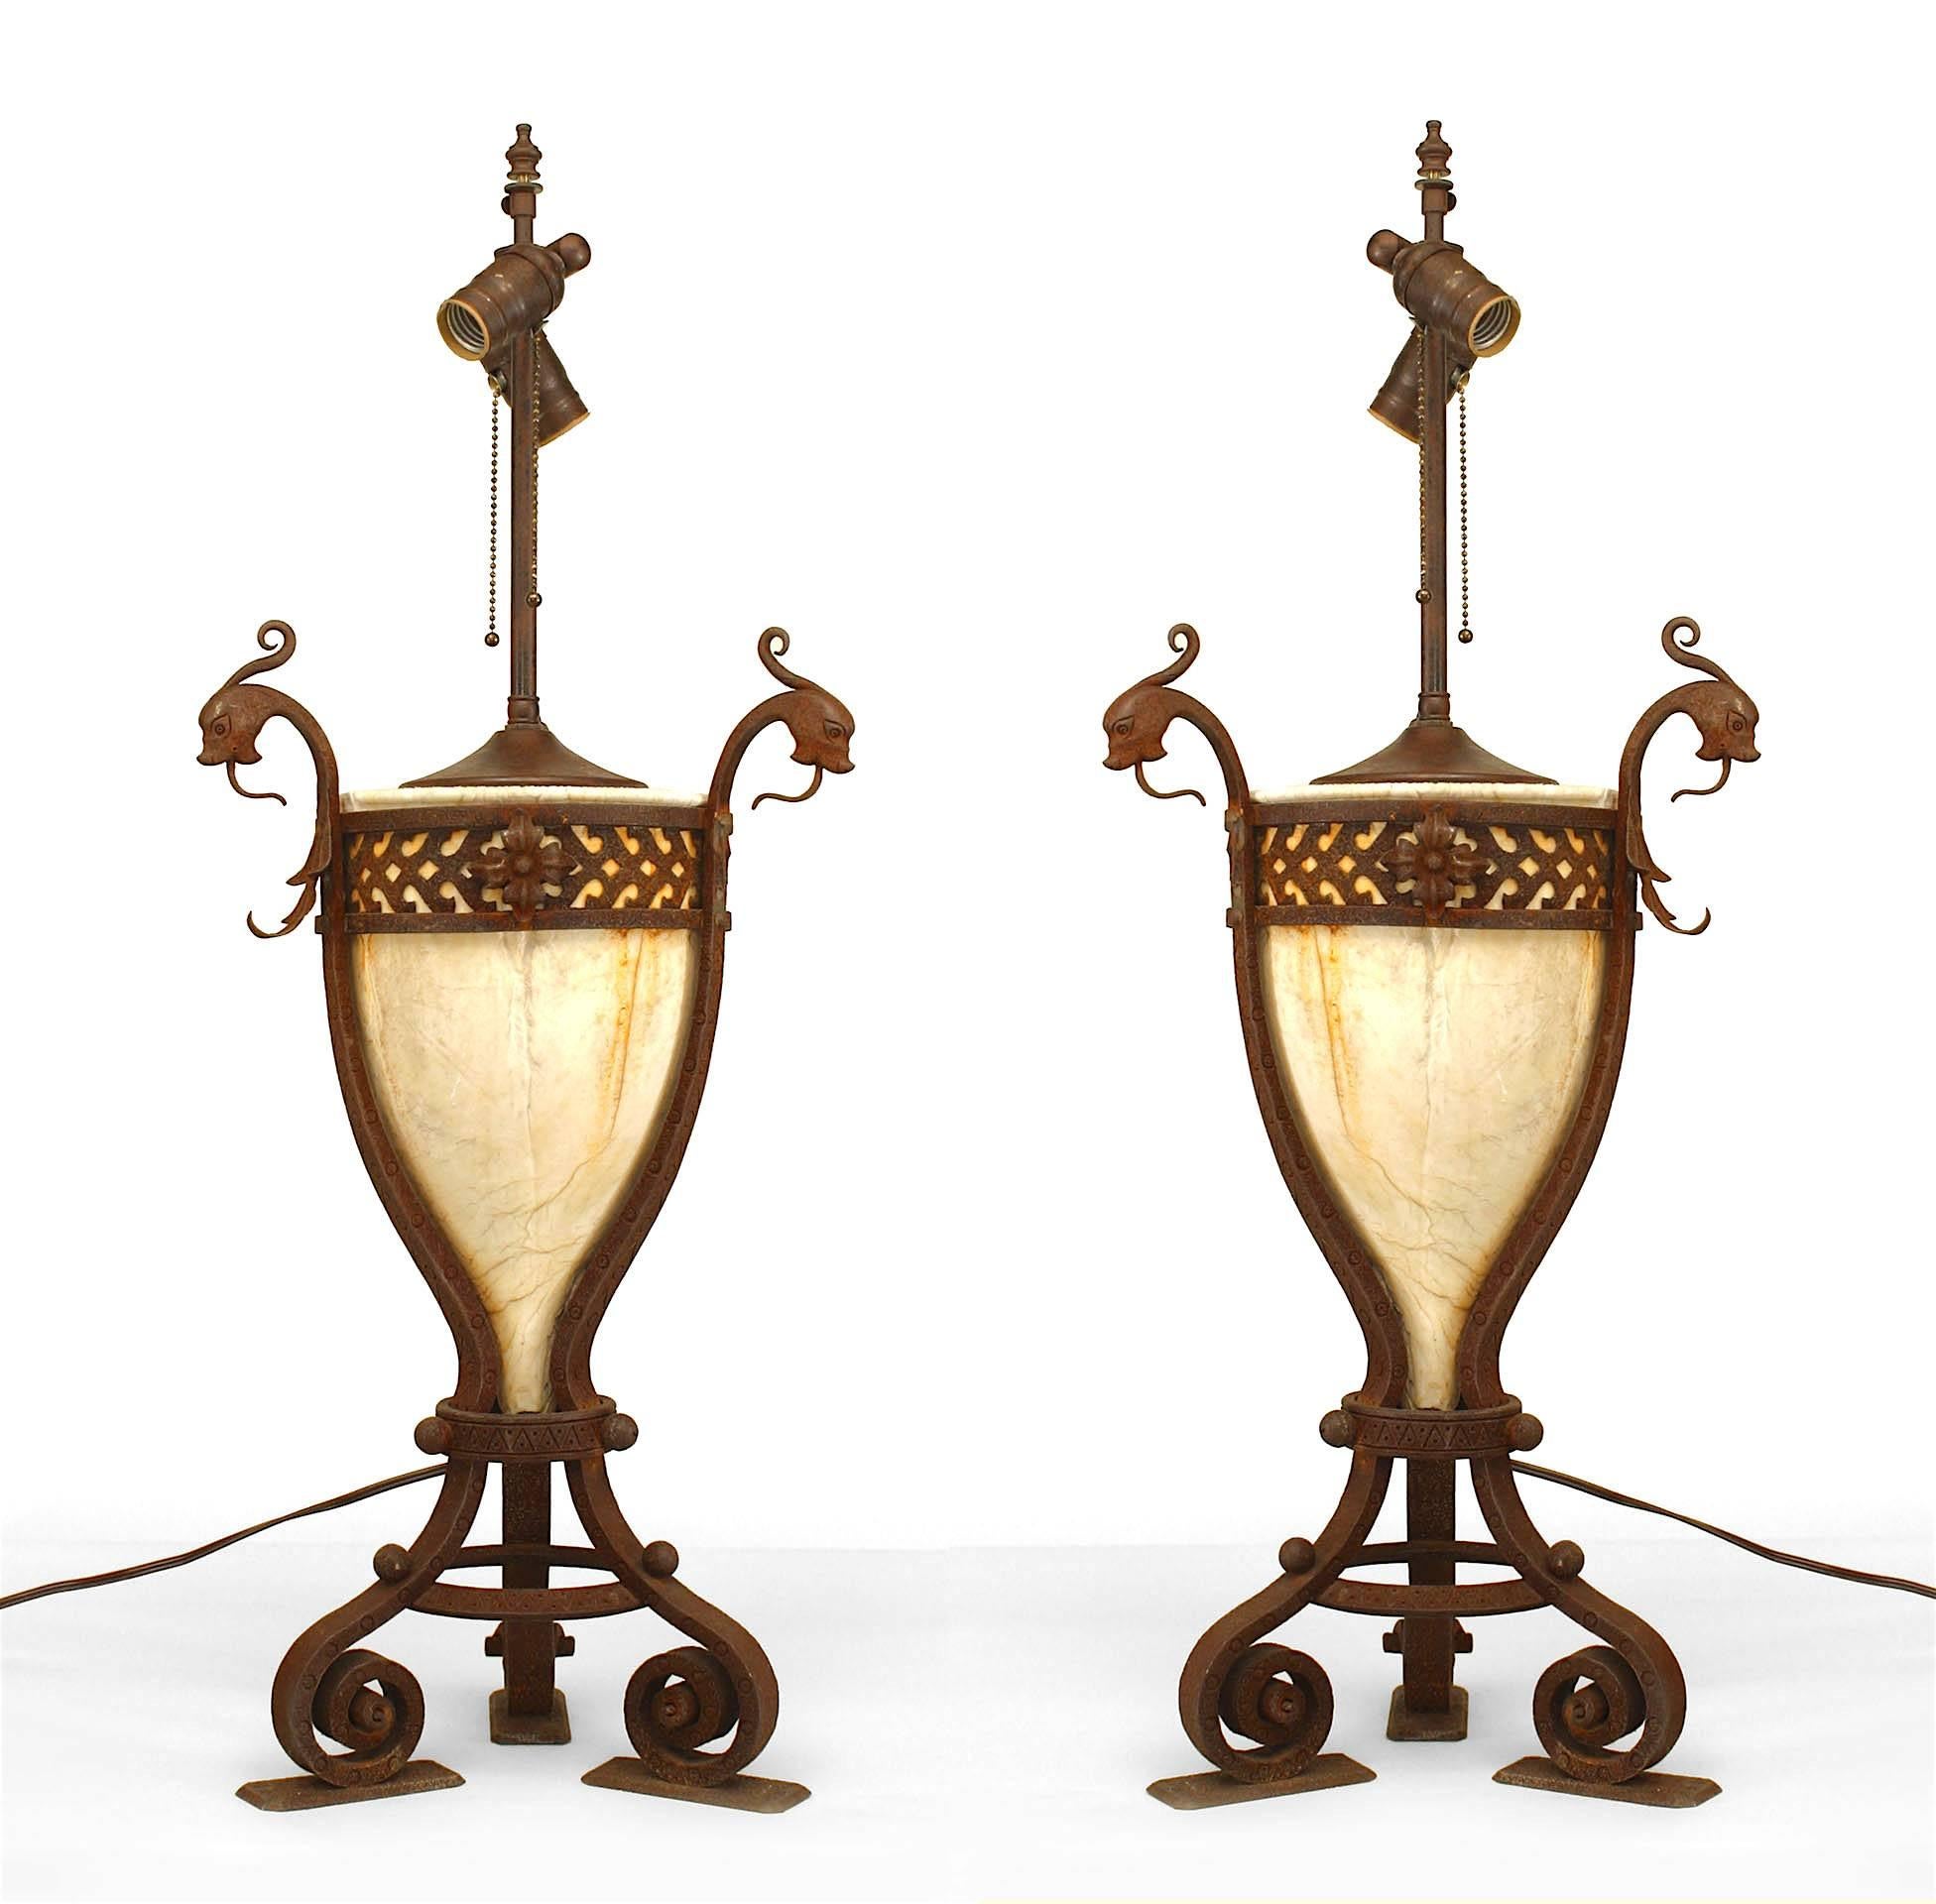 Pair of Italian Renaissance style (19/20th Century) alabaster vase form lamps within a wrought iron 3 section frame with mythological finial heads and scroll feet (PRICED AS Pair).
